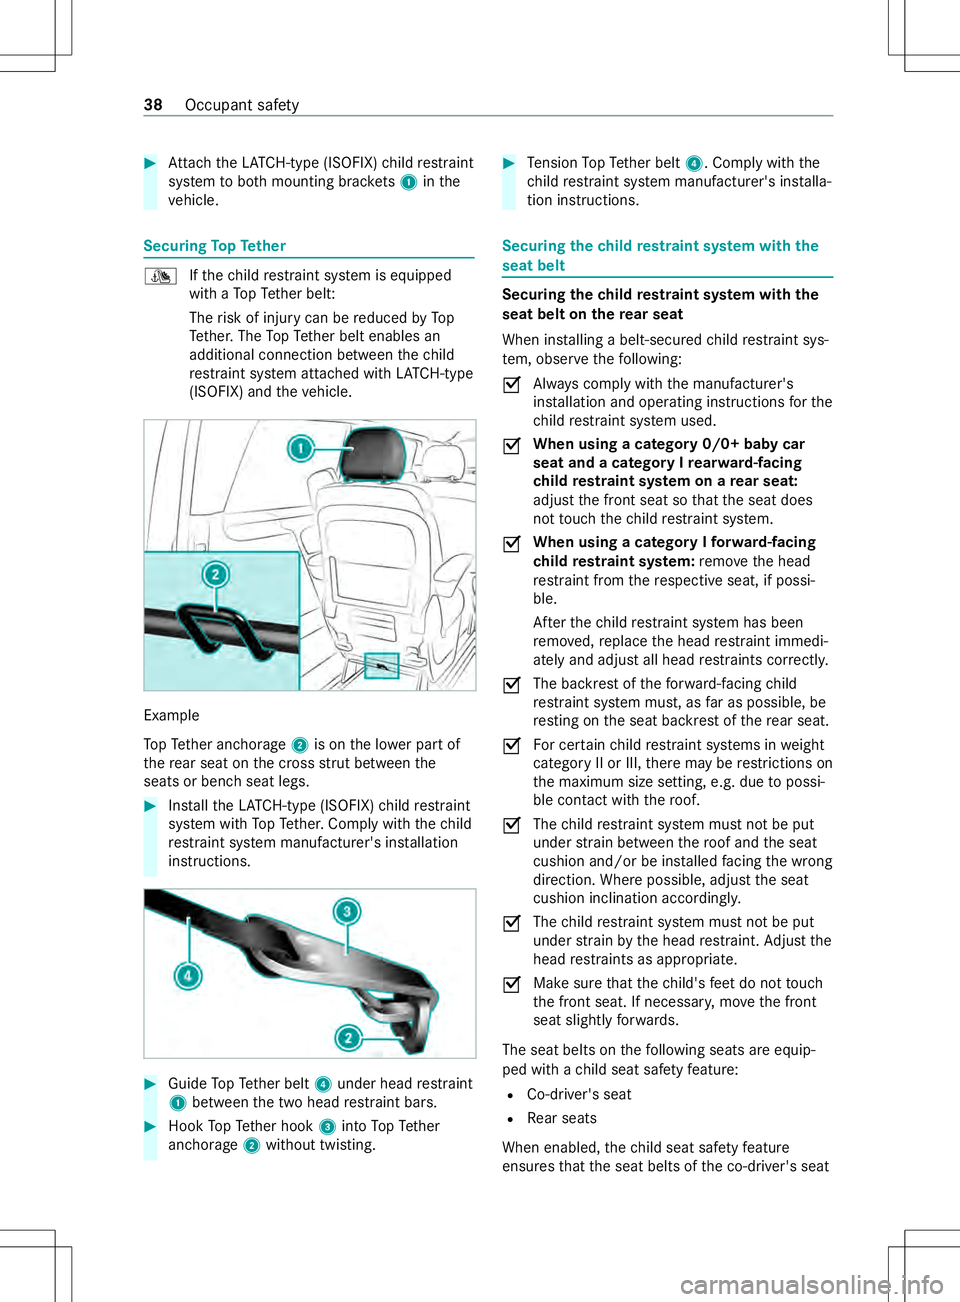 MERCEDES-BENZ METRIS 2021  MY21 Operators Manual #
Attach theL ATCH -type (ISOFIX )child restra int
sy stem toboth mounting brac kets 1 inthe
ve hicle. Securing
TopT ether ¯
Ifth ec hild restra int sy stem is equipped
wit haT opTether belt:
The ris